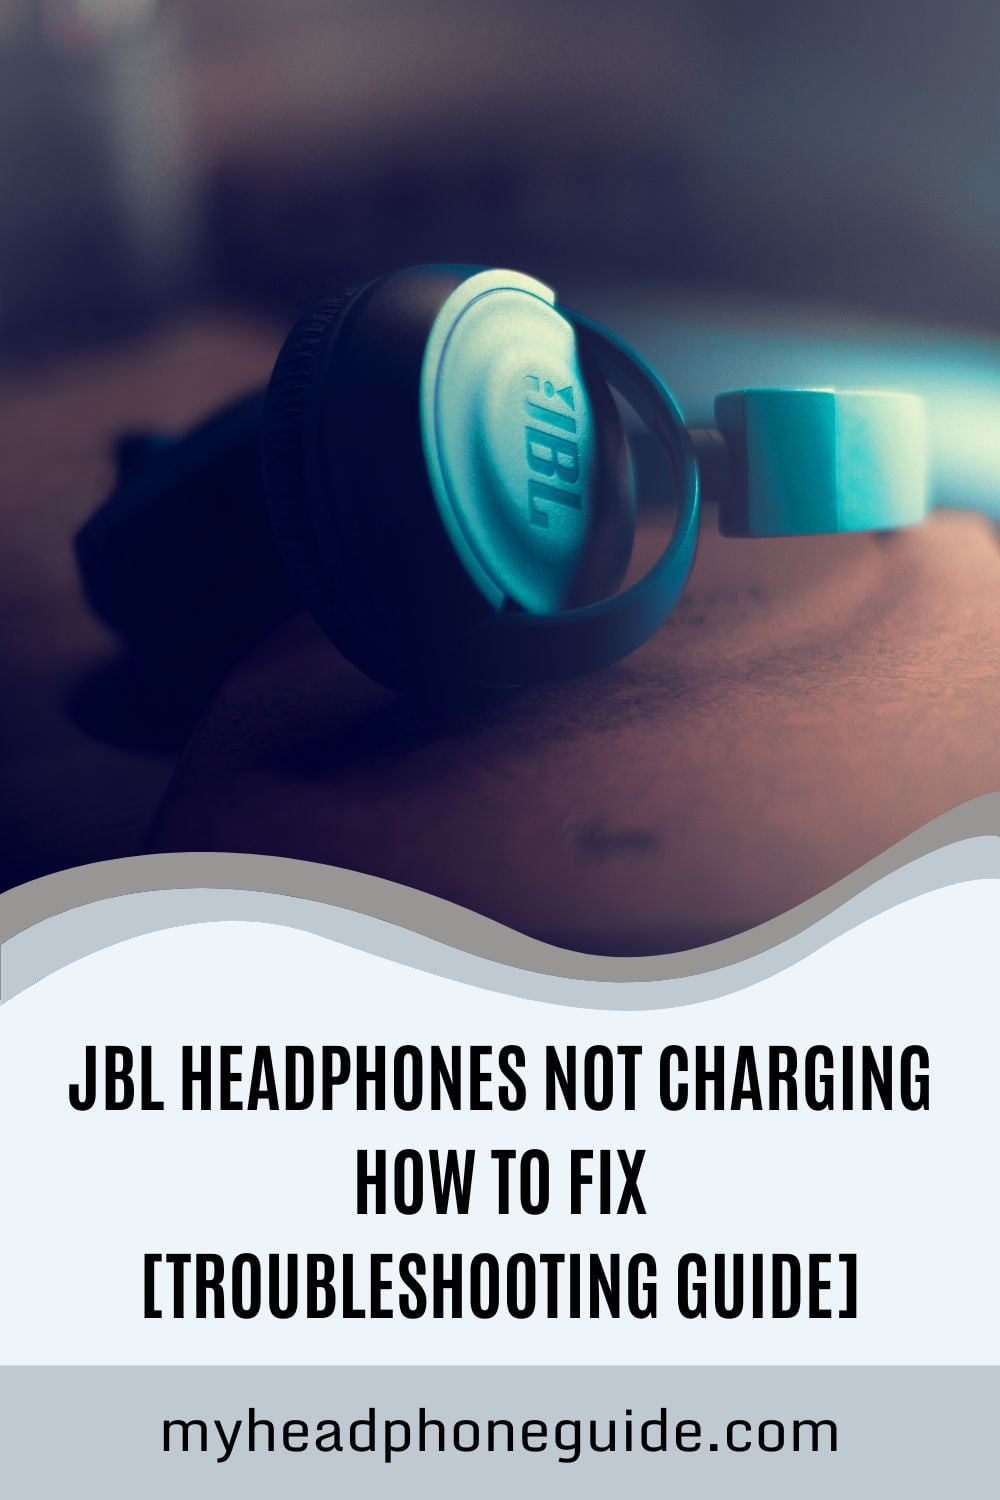 JBL Headphones Not Charging: How to Fix [Troubleshooting Guide]